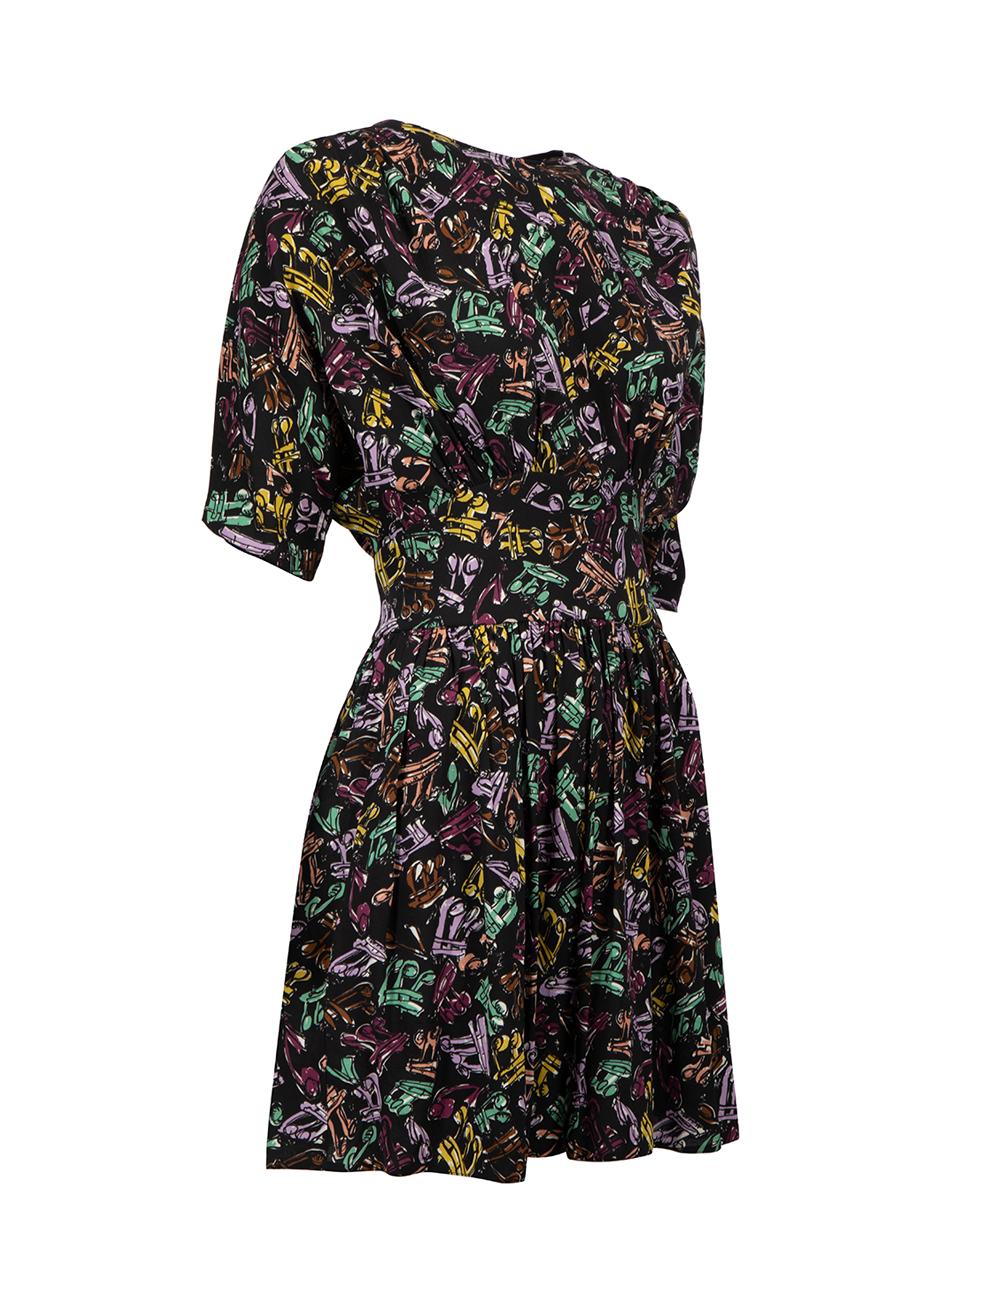 CONDITION is Very good. Hardly any visible wear to dress is evident on this used Miu Miu designer resale item.



Details


Black / Multicoloured 

Viscose

Mini dress

Multicoloured musical notes print

Round neckline

1/2 Length sleeves

2x Side